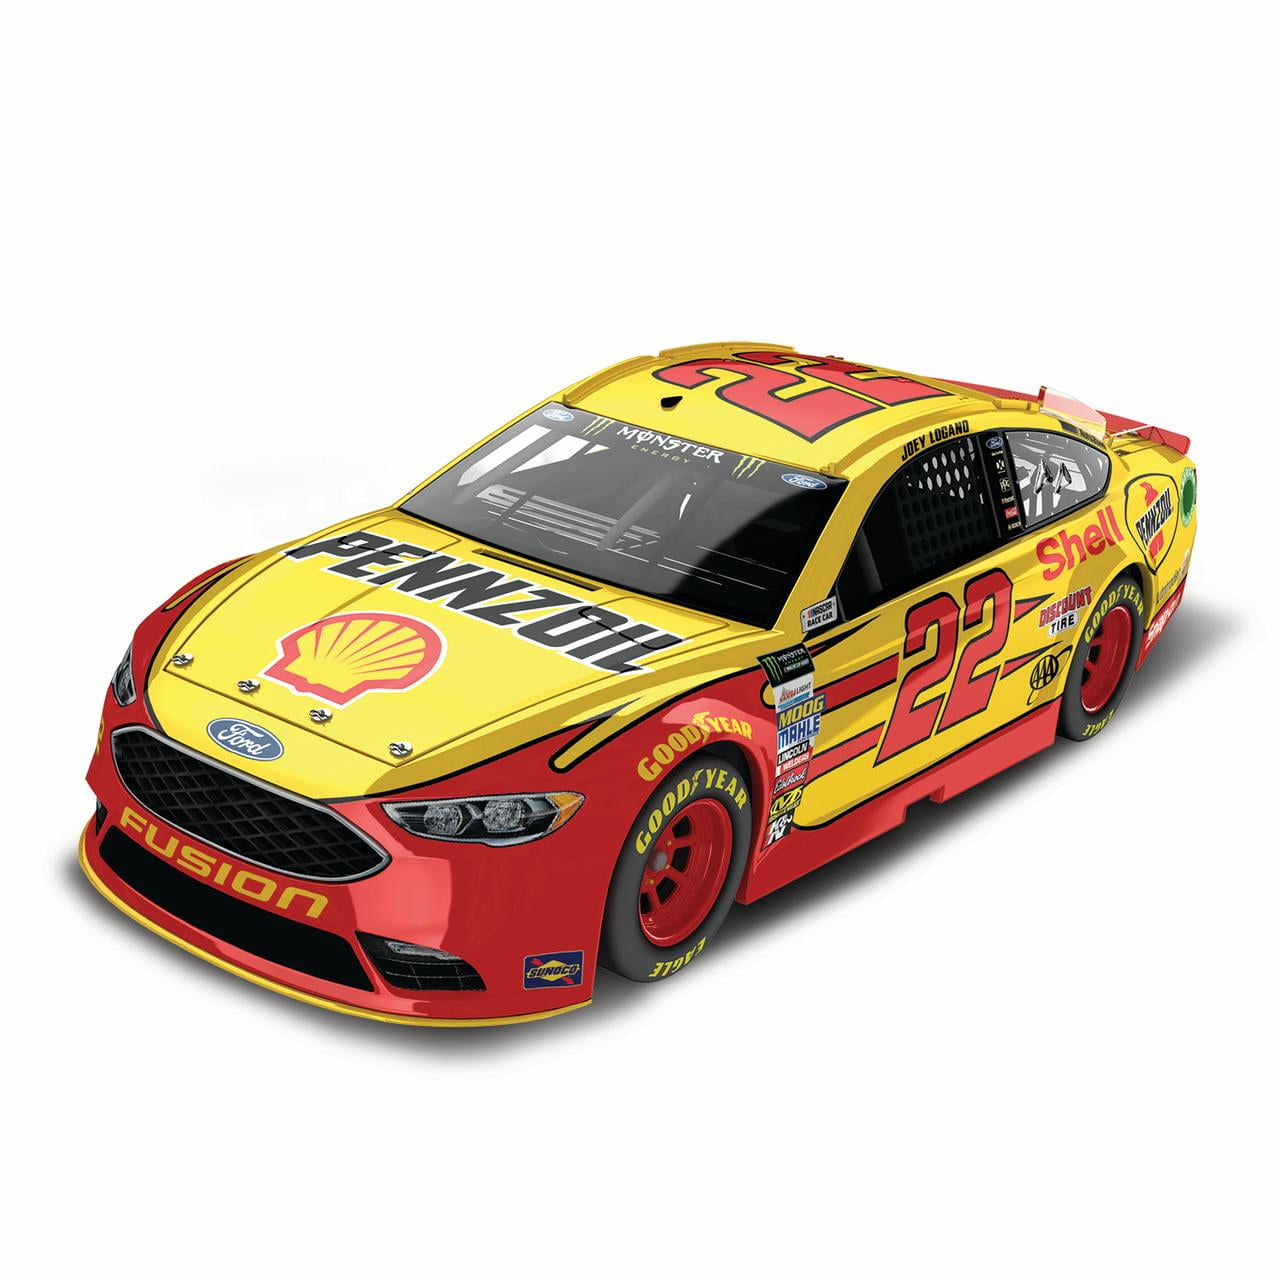 Lionel Racing Joey Logano #22 Shell-pennzoil Red 2015 Ford Fusion NASCAR 1 64 for sale online 